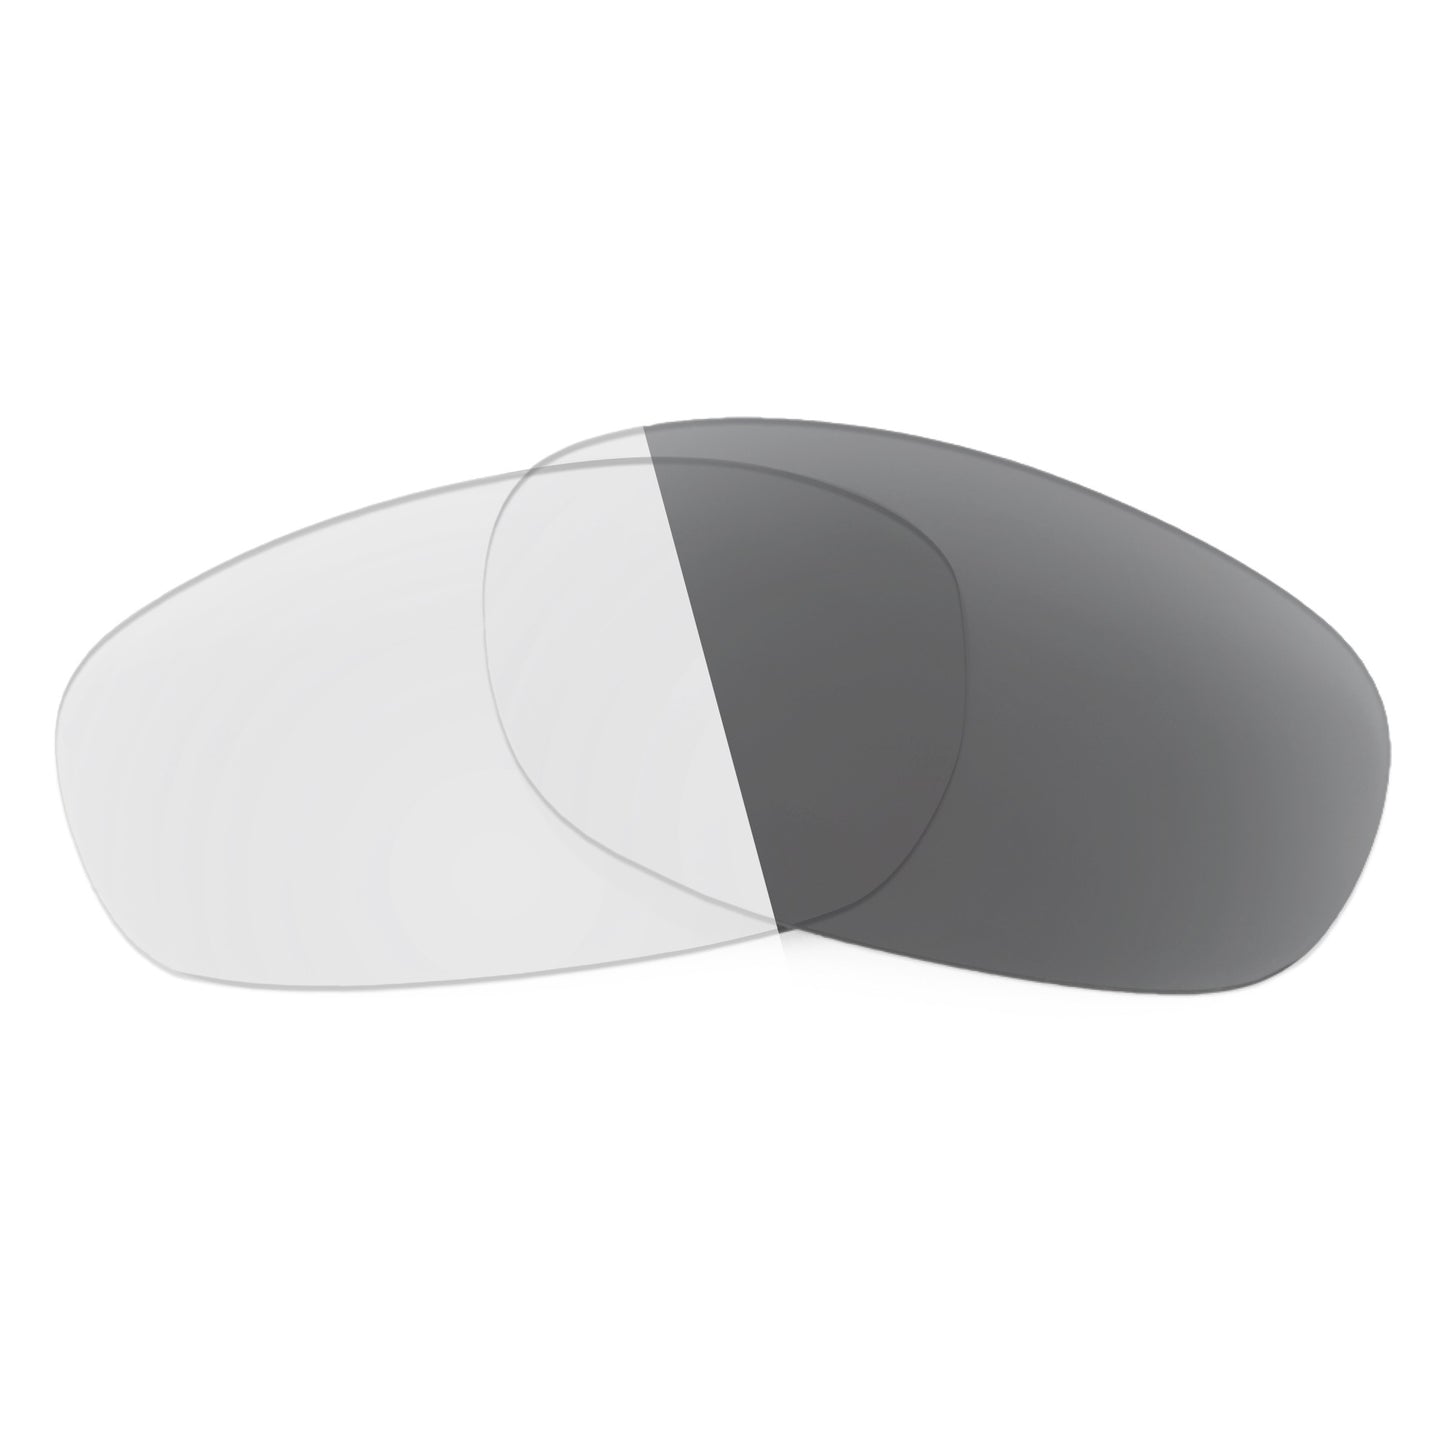 Revant replacement lenses for Wiley X SG-1 Non-Polarized Adapt Gray Photochromic